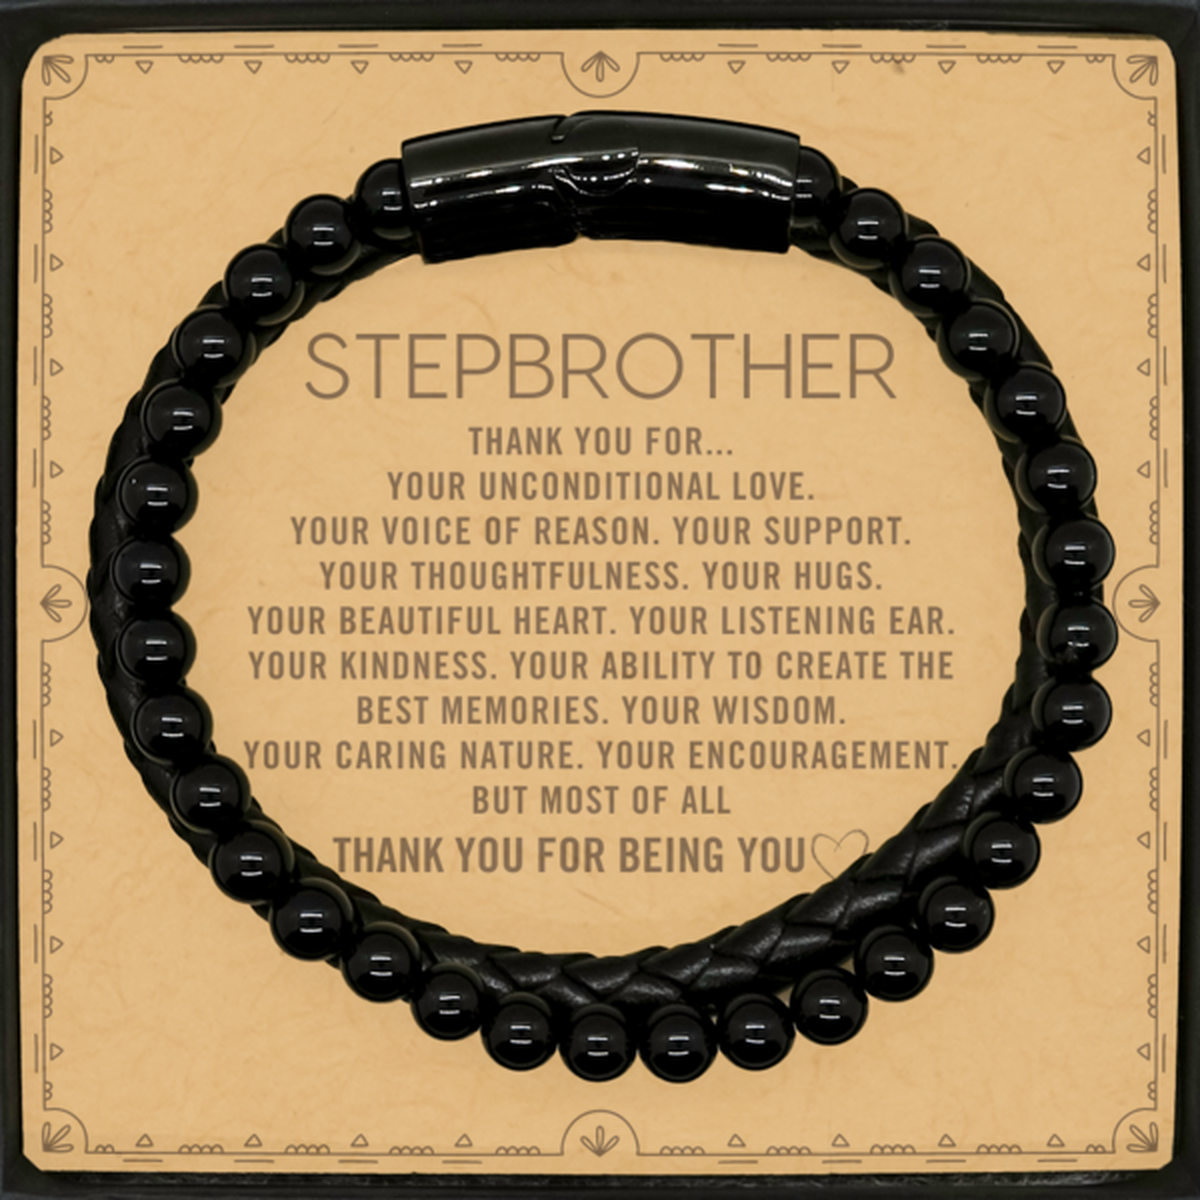 Stepbrother Stone Leather Bracelets Custom, Message Card Gifts For Stepbrother Christmas Graduation Birthday Gifts for Men Women Stepbrother Thank you for Your unconditional love